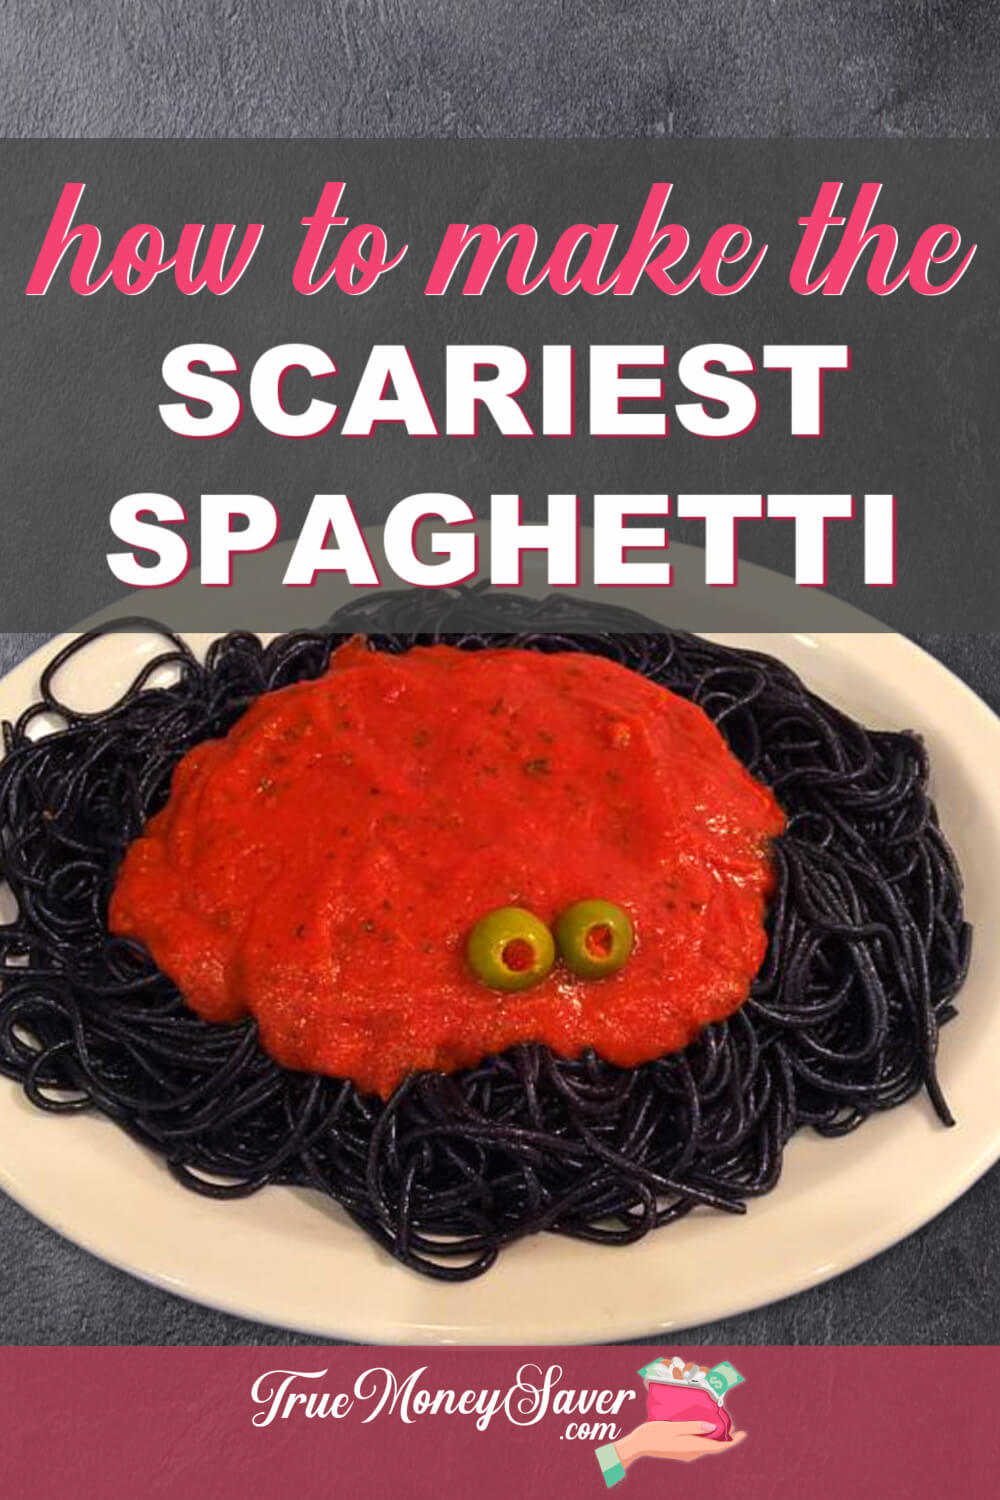 How To Make The Scariest Spaghetti Sauce Dinner For Halloween